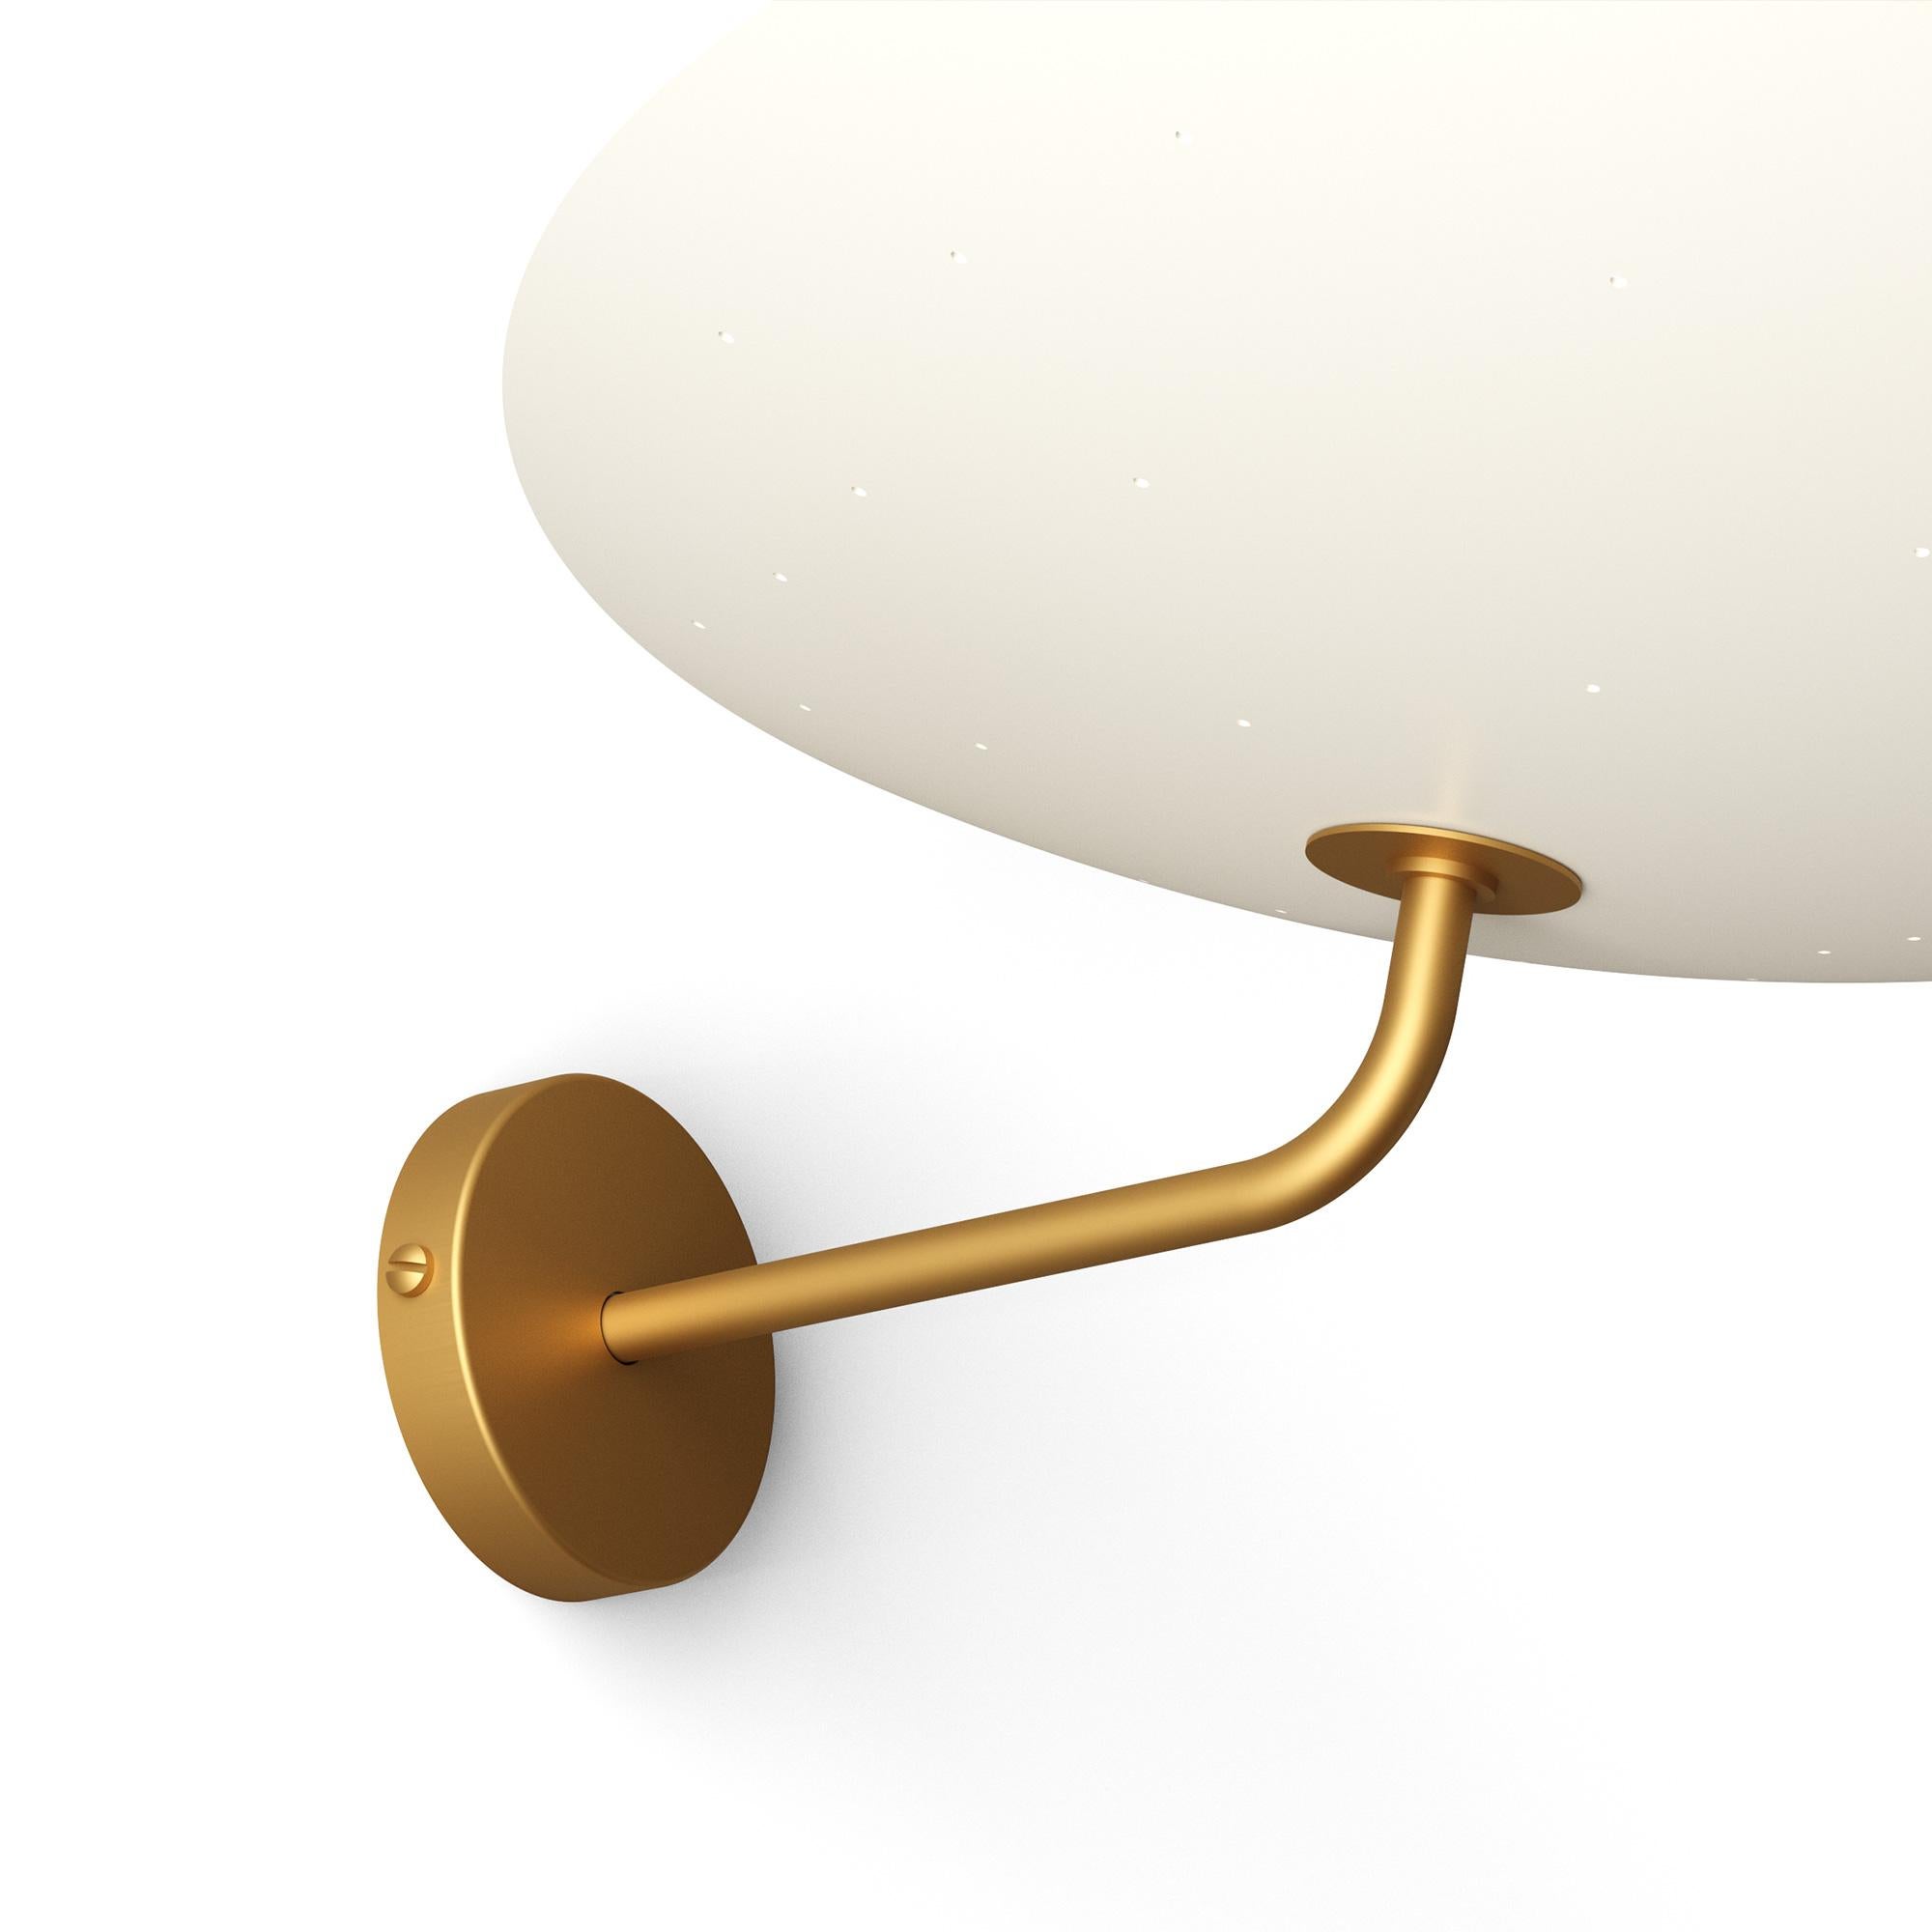 2059 Brushed Brass Wall Lamp by Disderot
Limited Edition. 
Designed by Pierre Disderot.
Dimensions: Ø 40 x H 12 cm.
Materials: Brushed brass. 

Delivered with authentication certificate. Made in France. Available in different colors and metal